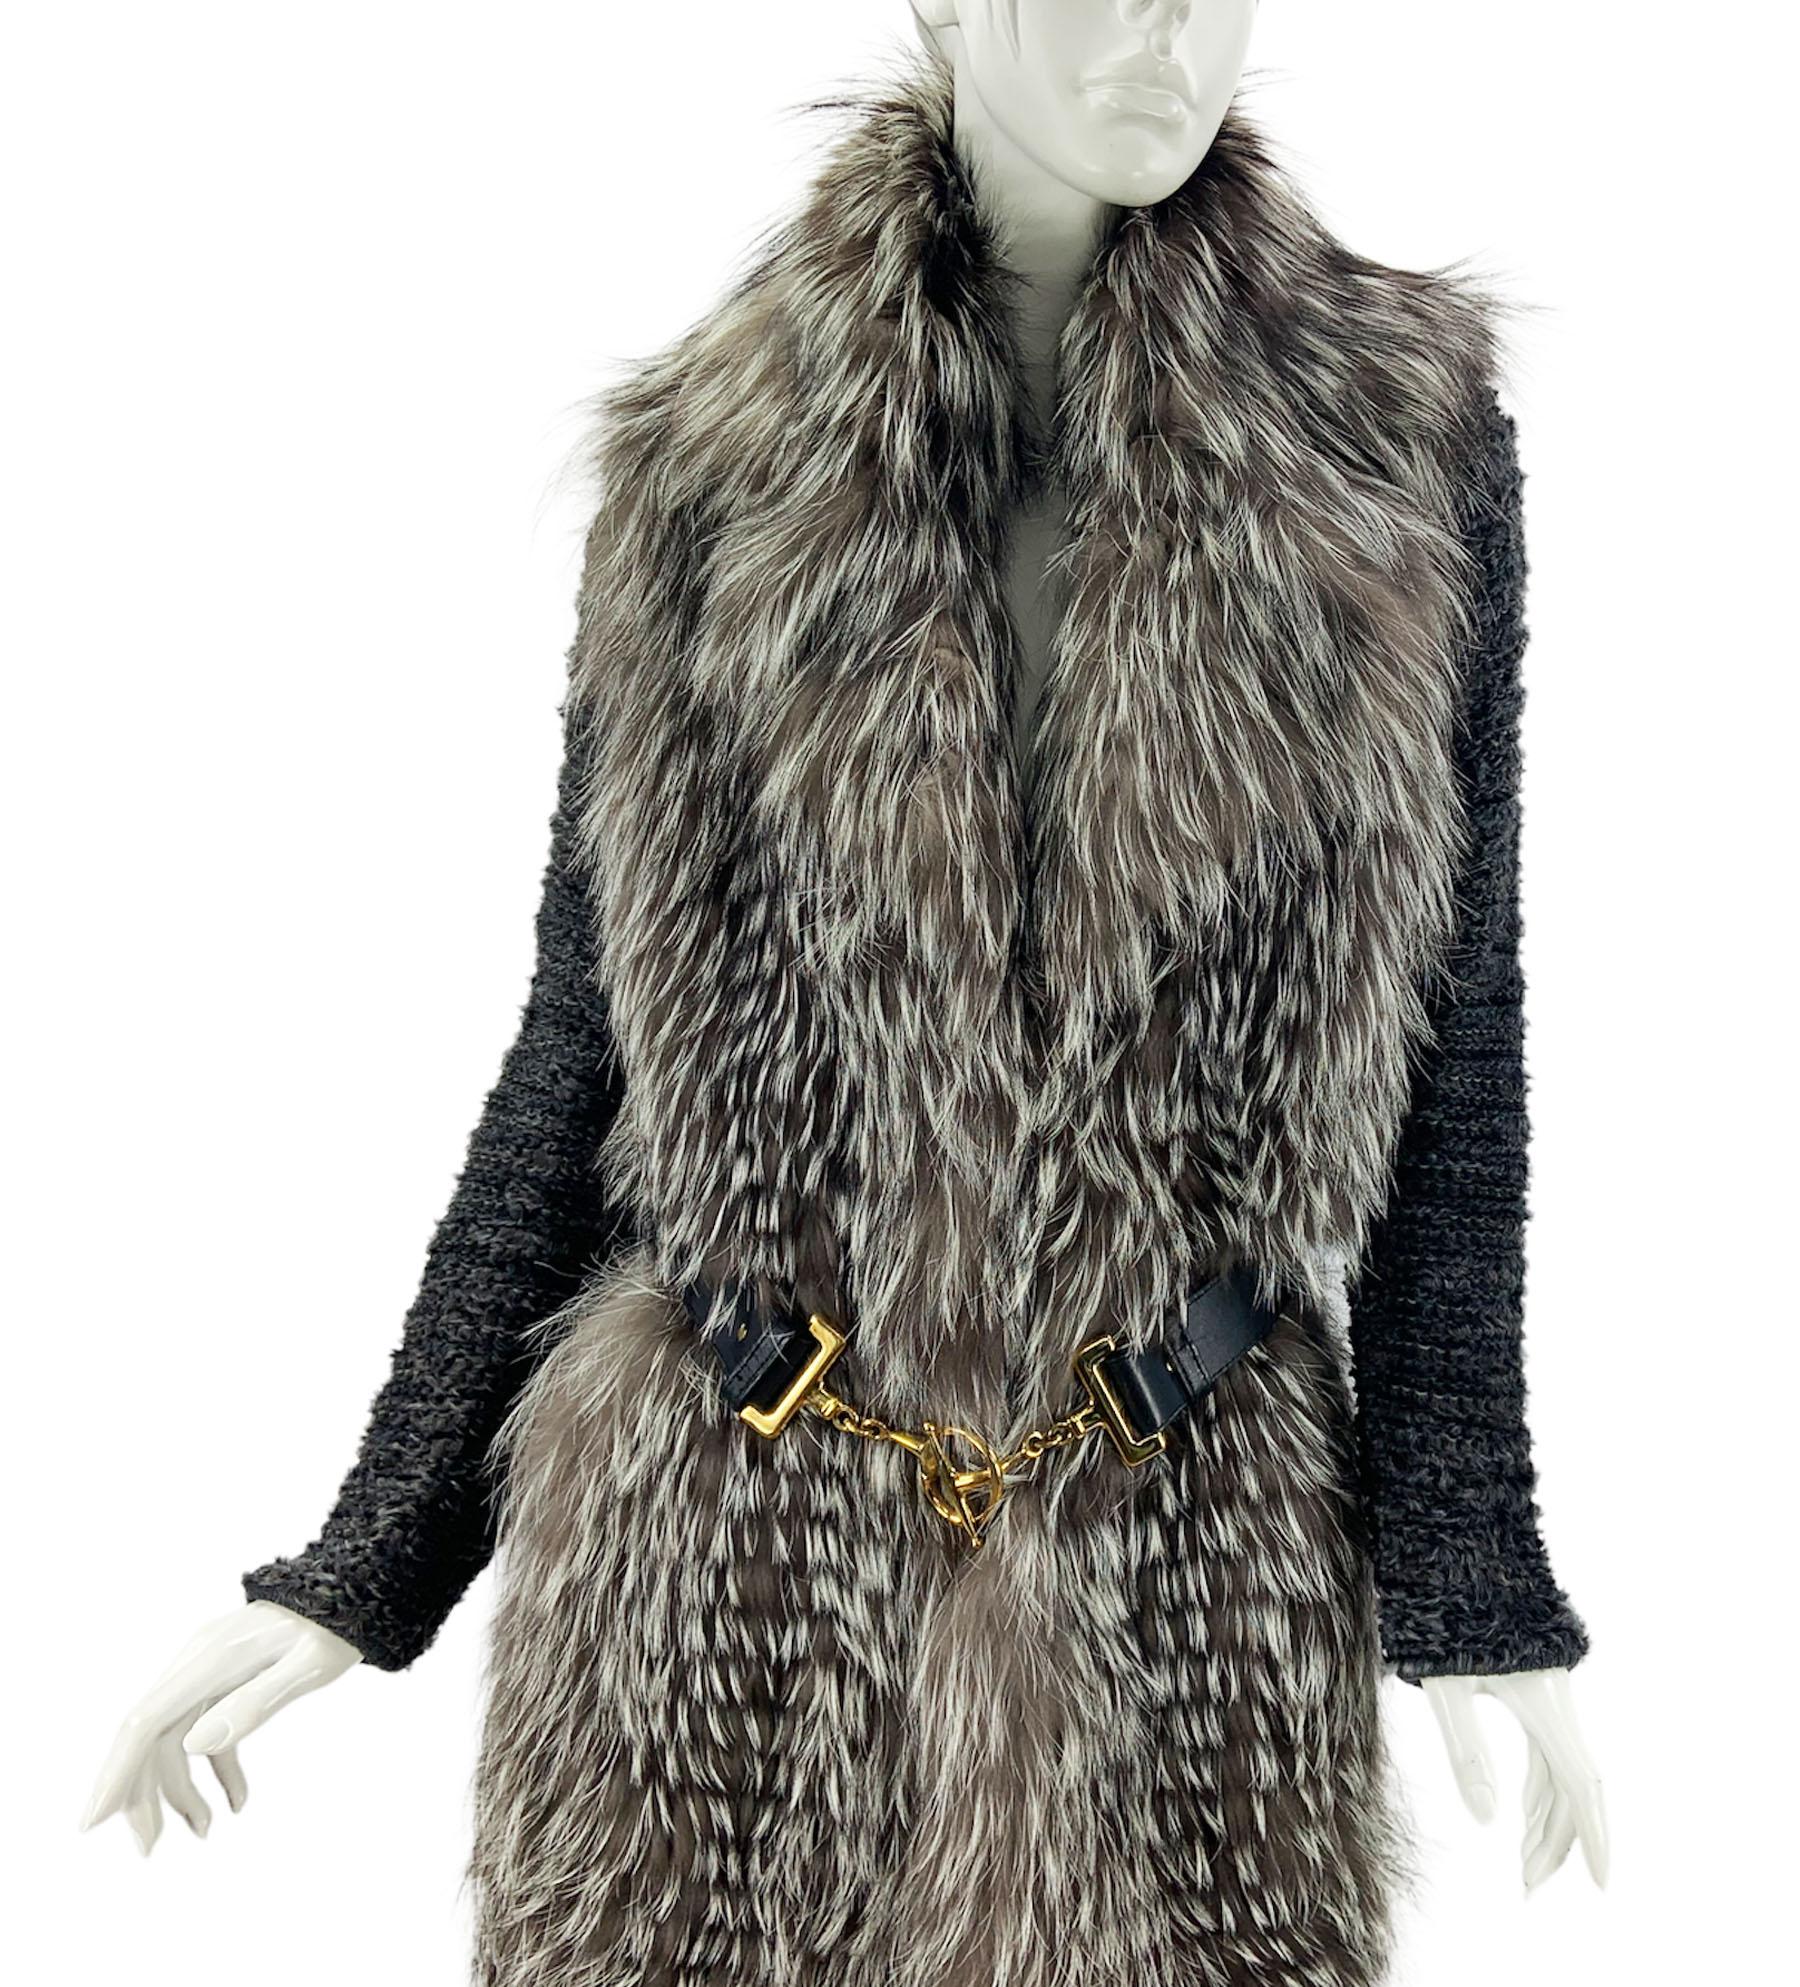 Gucci Silver Fox Lamb Dark Gray Belted Long Cardigan Coat
Italian 42
Front and Collar - Silver Fox ( origin - Finland), Sleeves and Back - Treated Fur Lamb ( origin - Afghanistan ).
Front are Double Lined in Fox with Side Pockets, Removable Black